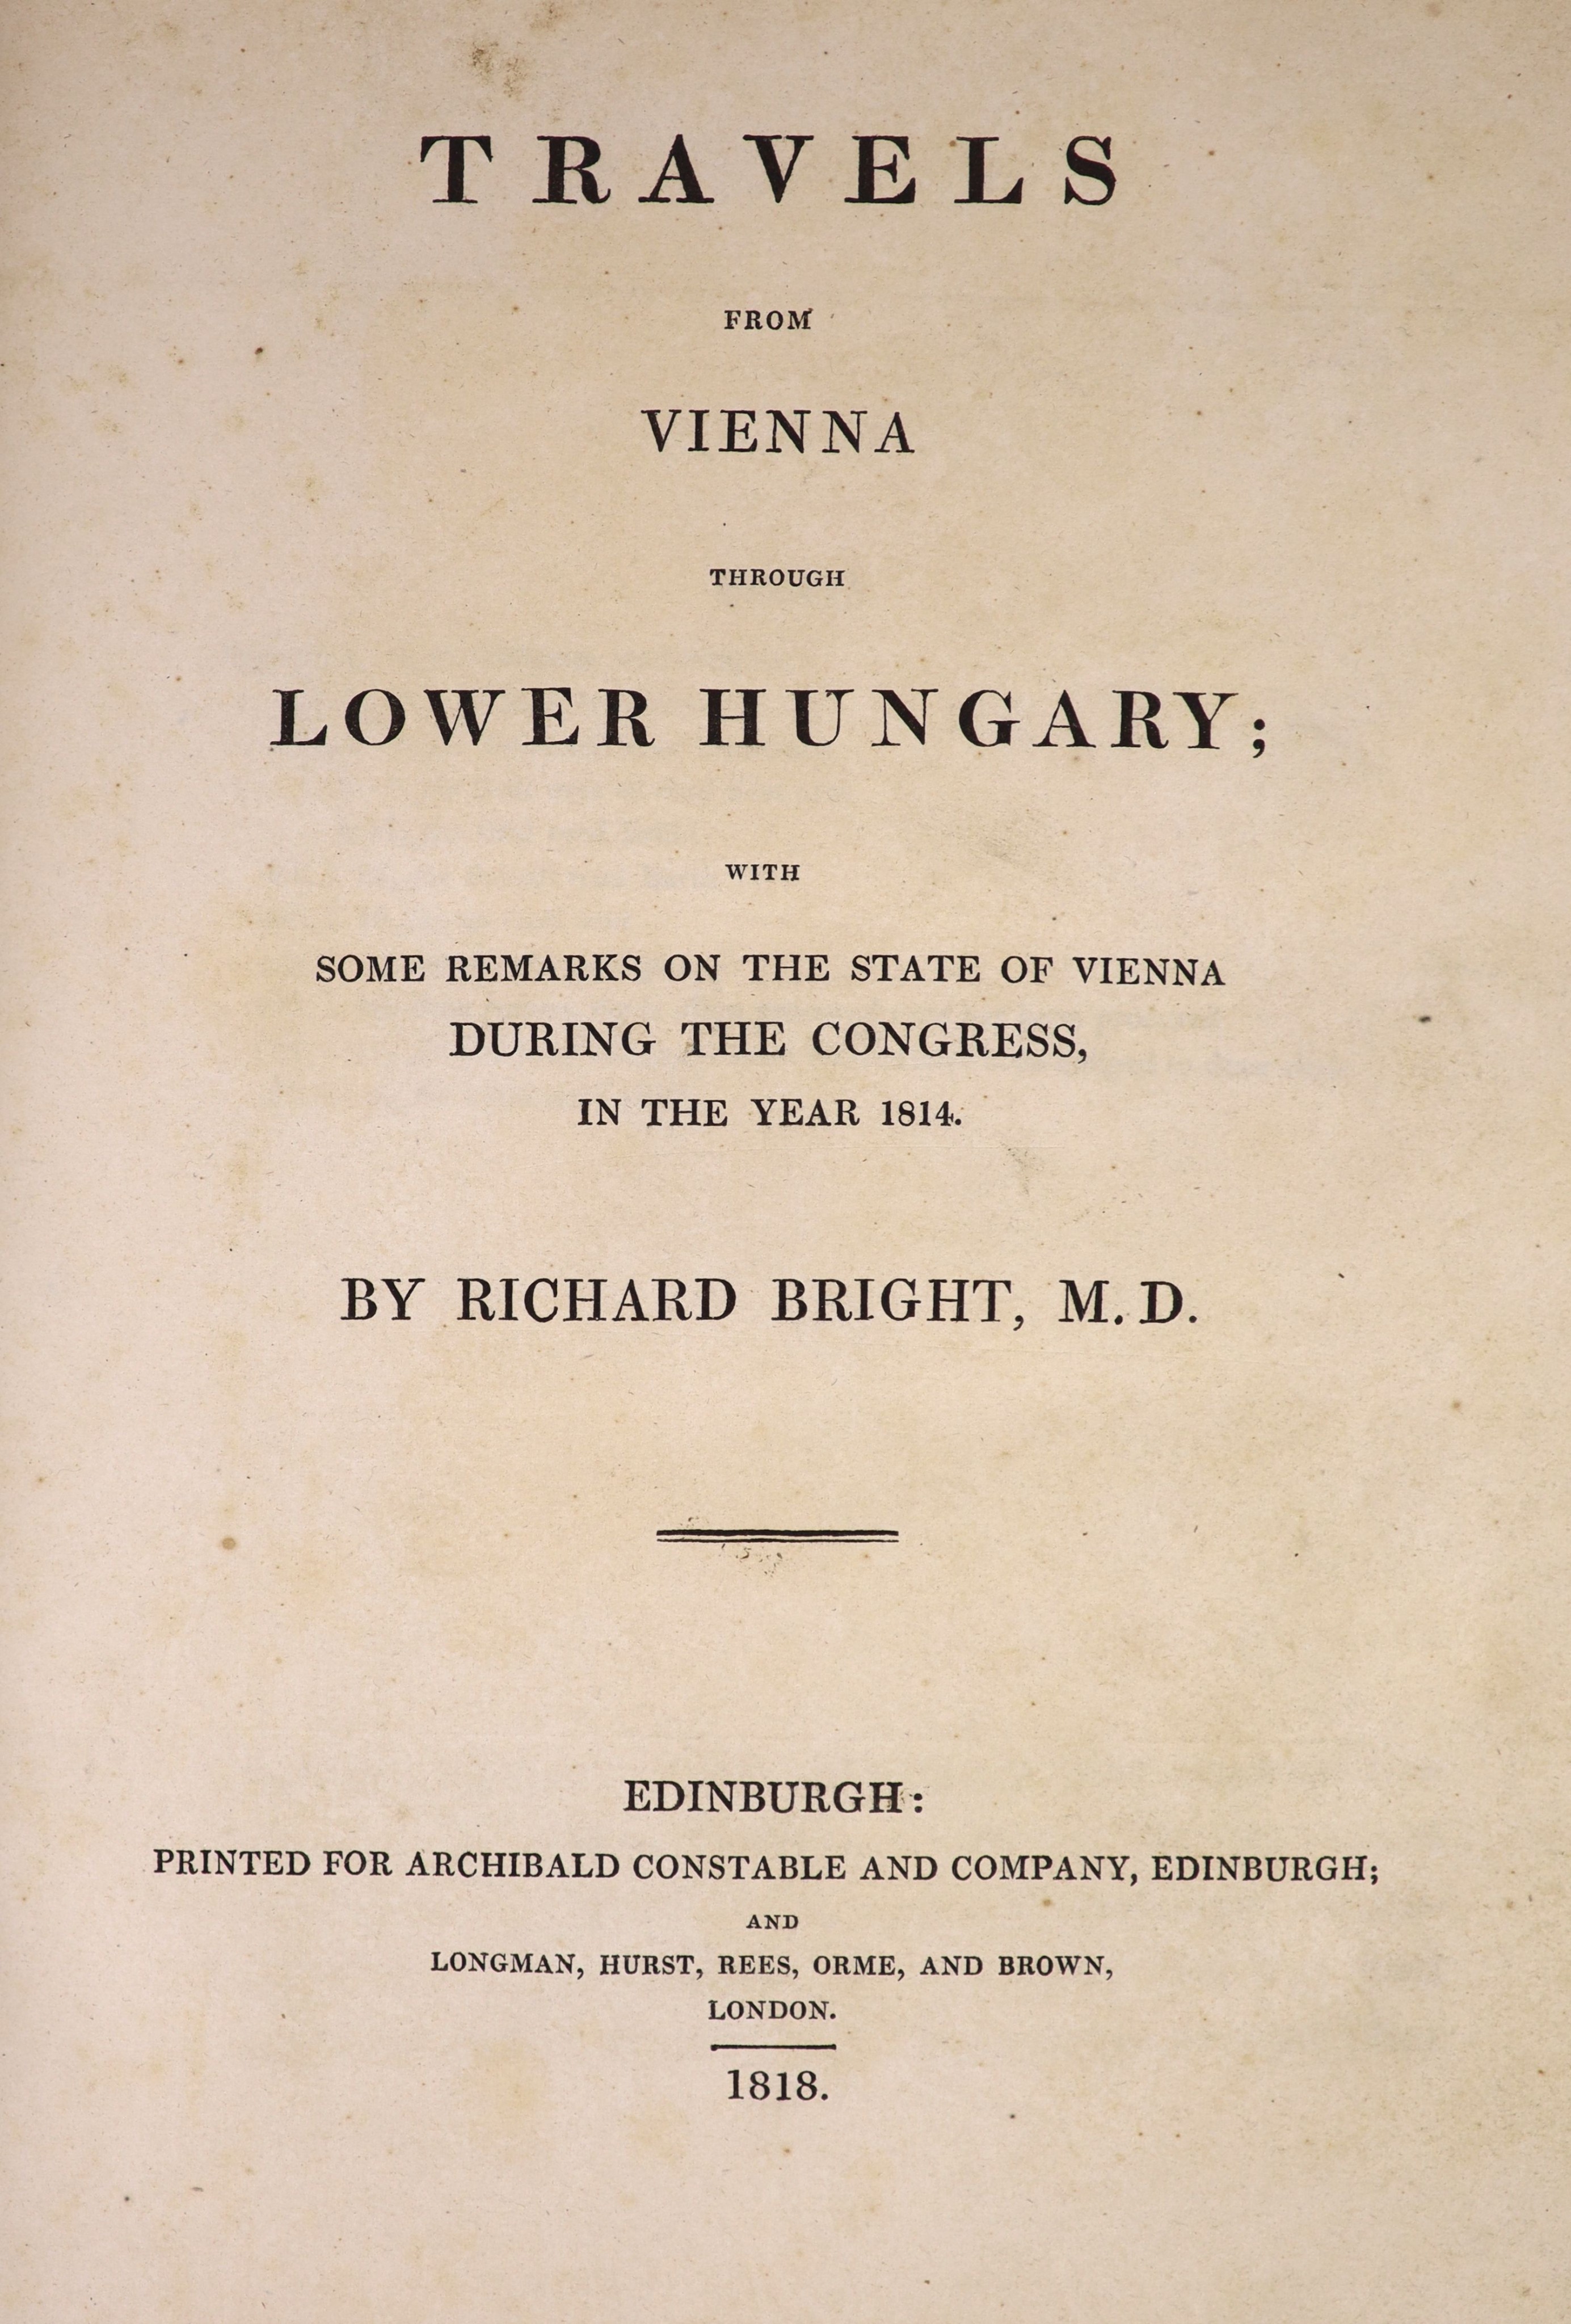 Bright, Richard - Travels from Vienna through Lower Hungary ... 2 folded maps (outline colour) and 9 (ex 10) engraved plates), chapter head vignette illus., folded table